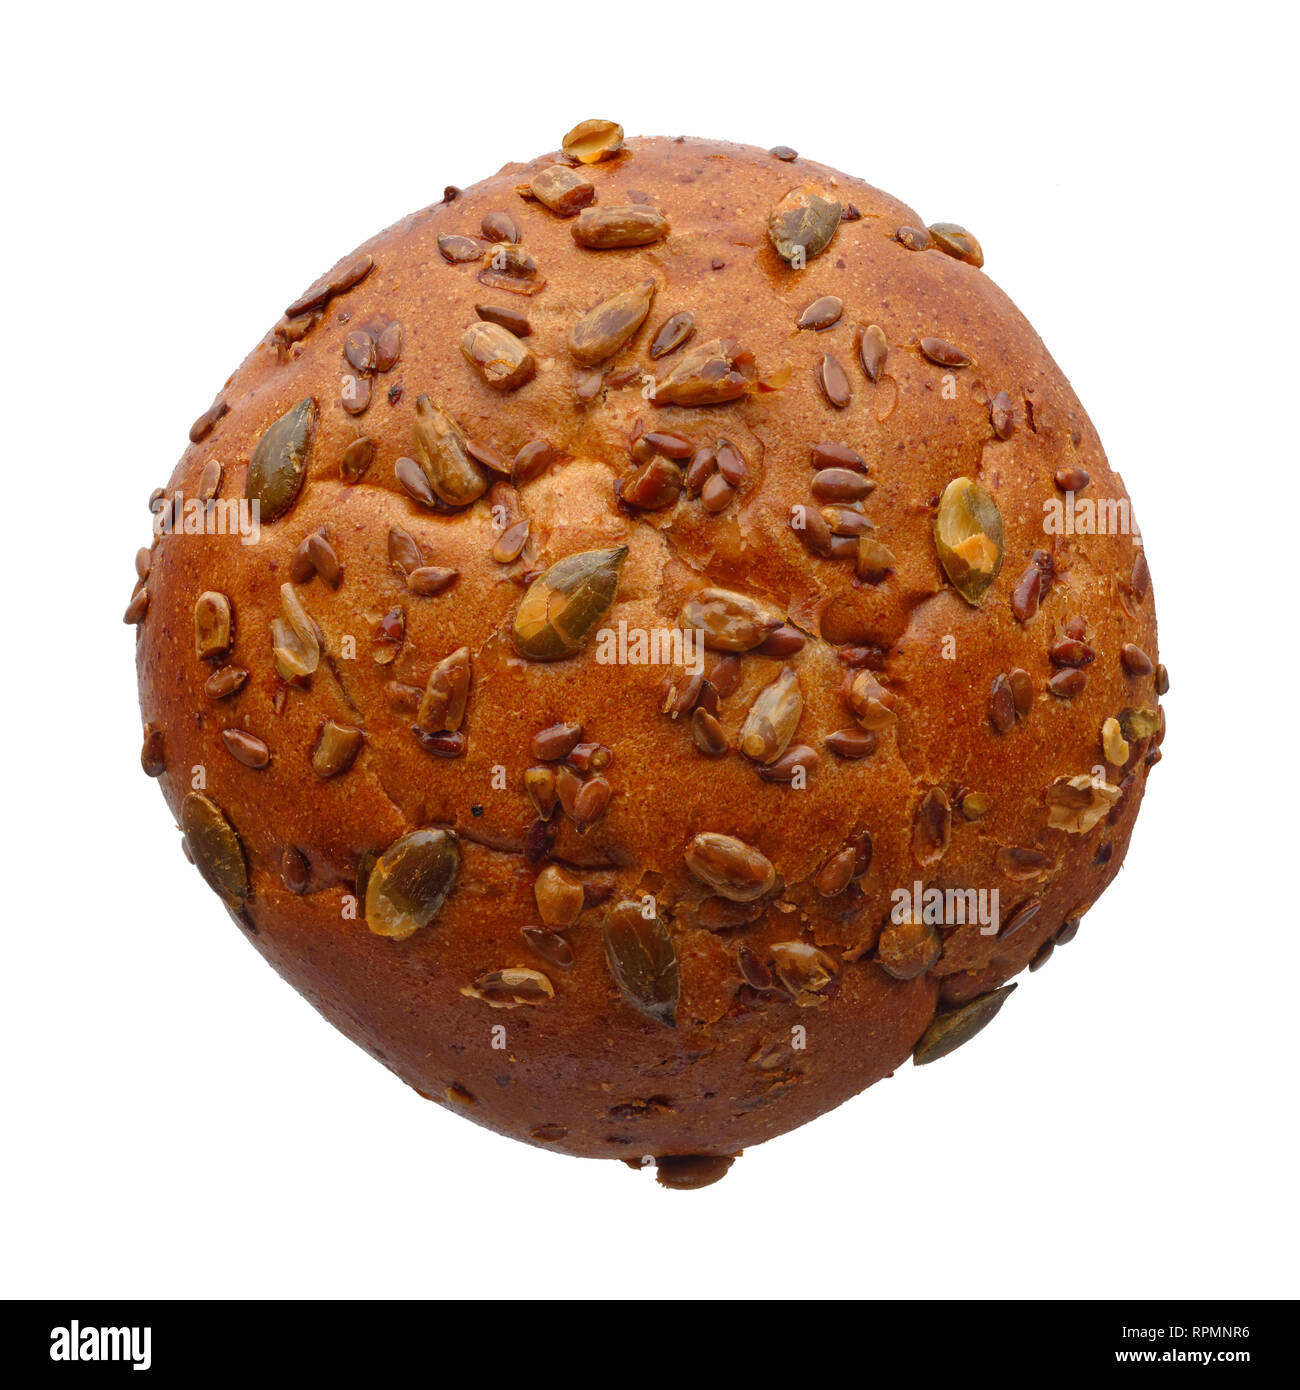 Food and drinks: single round multigrain bun with whole seeds, isolated on white background Stock Photo